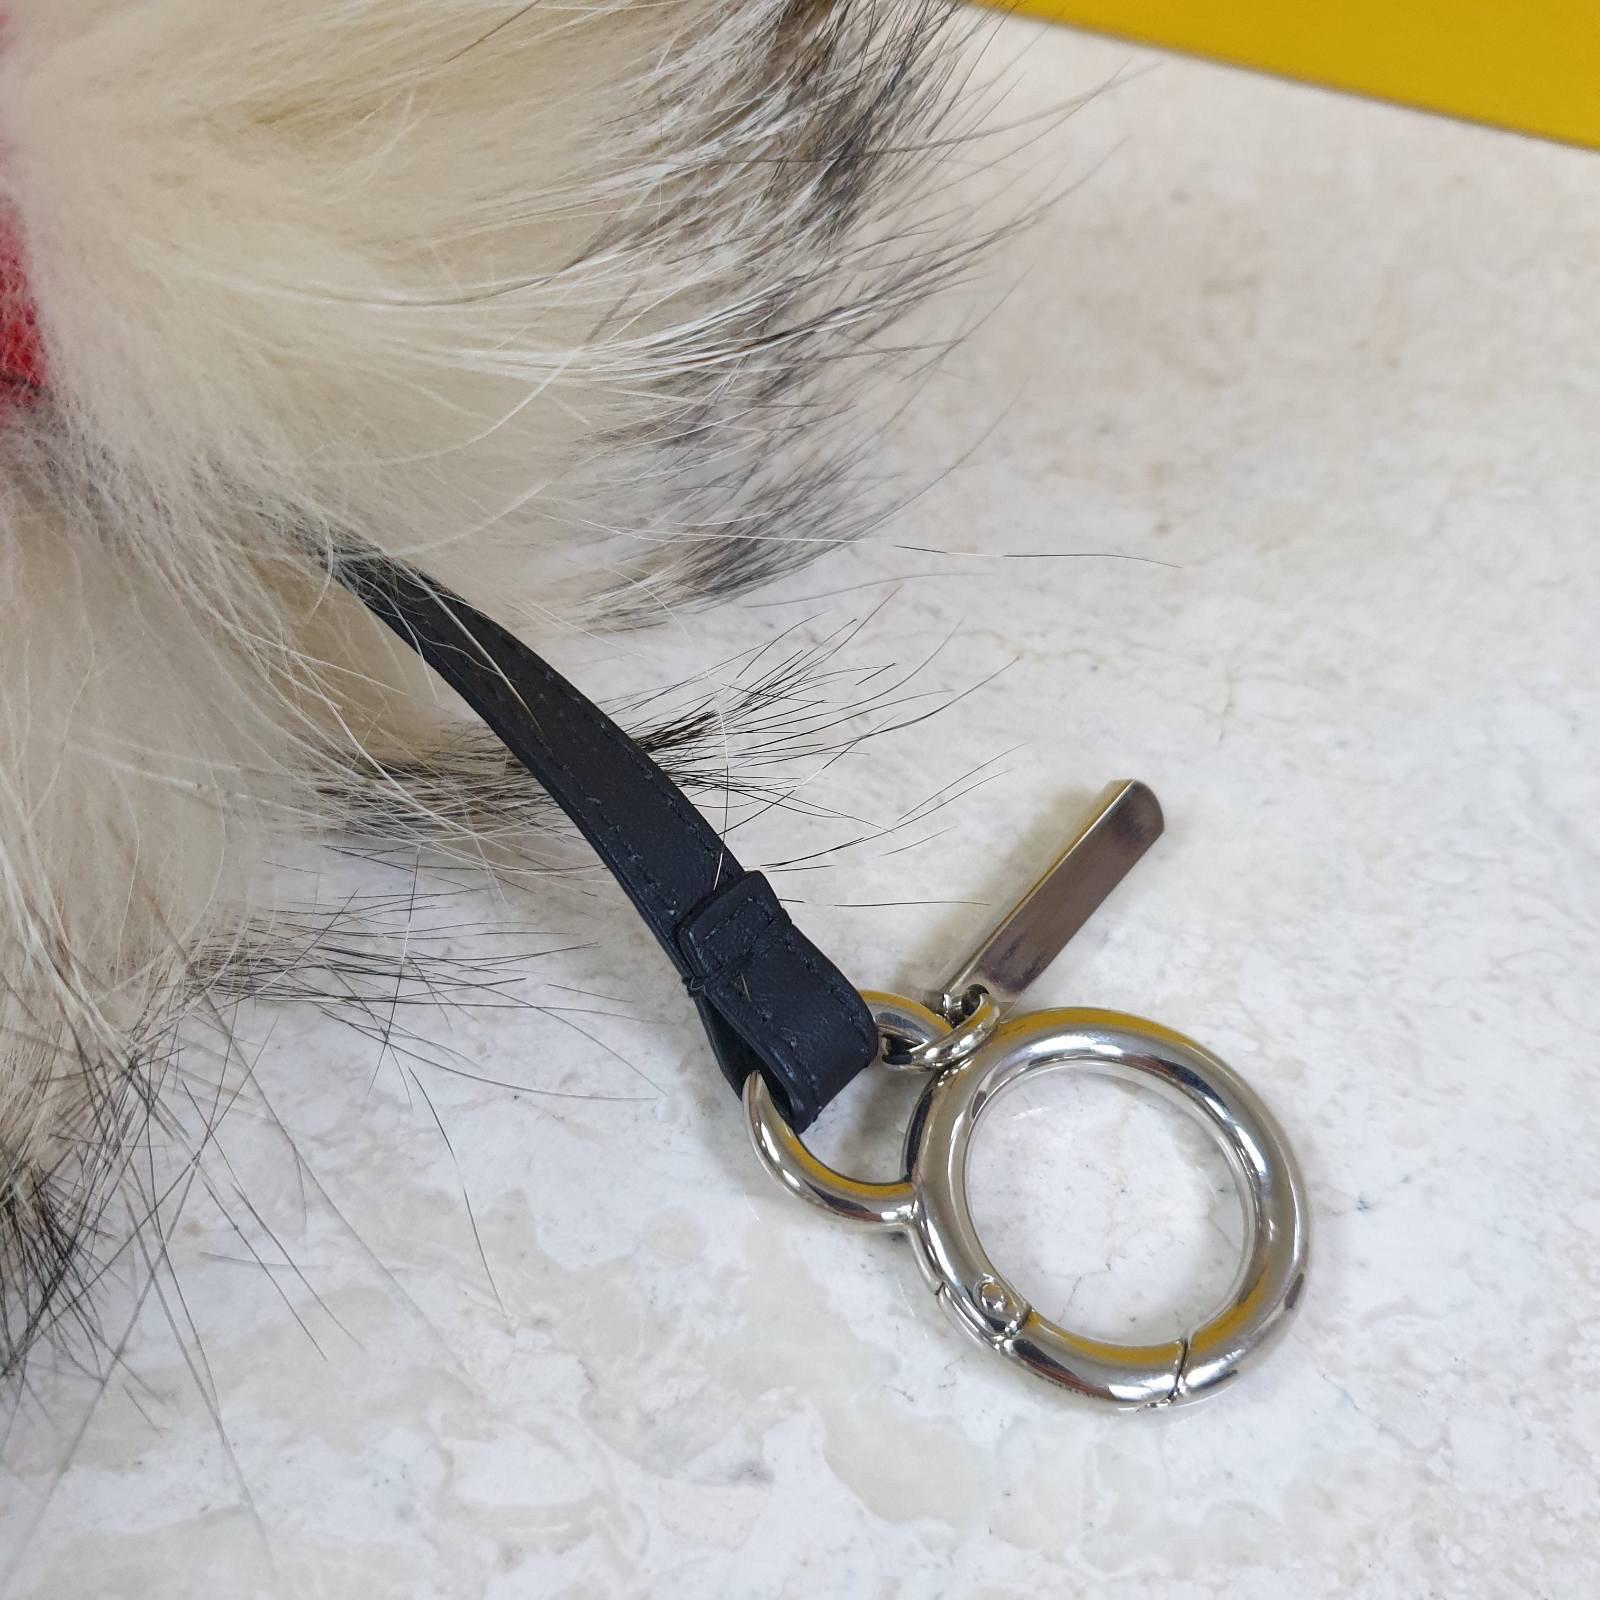 Fox fur , Mink fur

17*13 cm (Head)

New.Never worn condition. No original packaging.

For buyers from EU we can provide shipping from Poland. Please demand if you need.